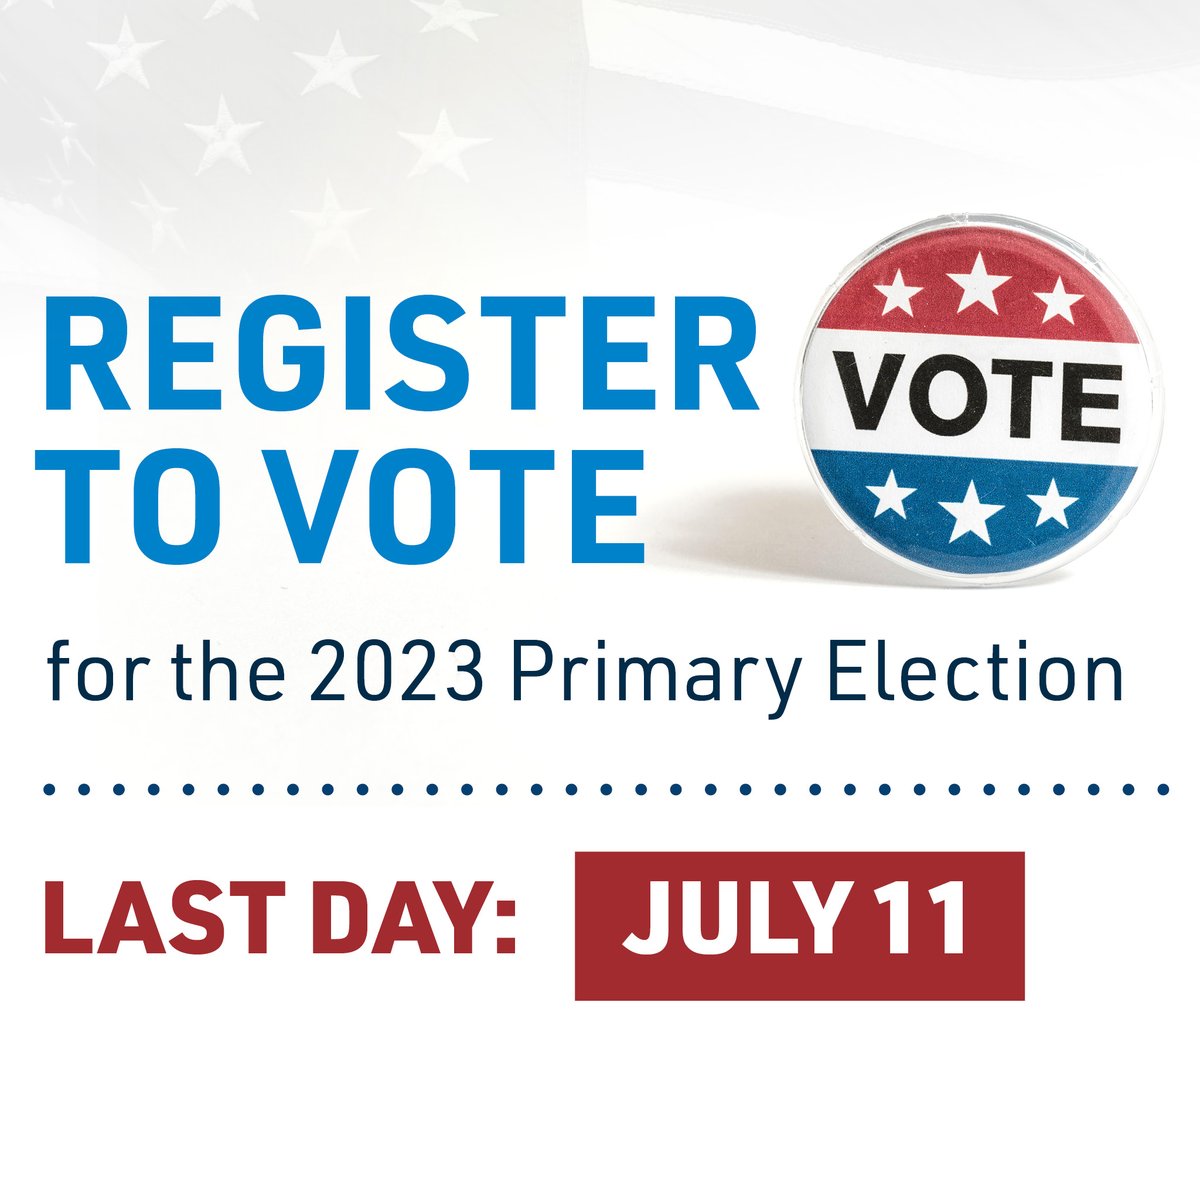 The last day to register to vote for the 2023 Primary Election is July 11. There are three ways you can get registered, in-person, online and by mail. Get registered today!

https://t.co/BDmsIV3BHO.

@SedgwickCounty
#SedgwickCountyElections https://t.co/98WXfnqMkL